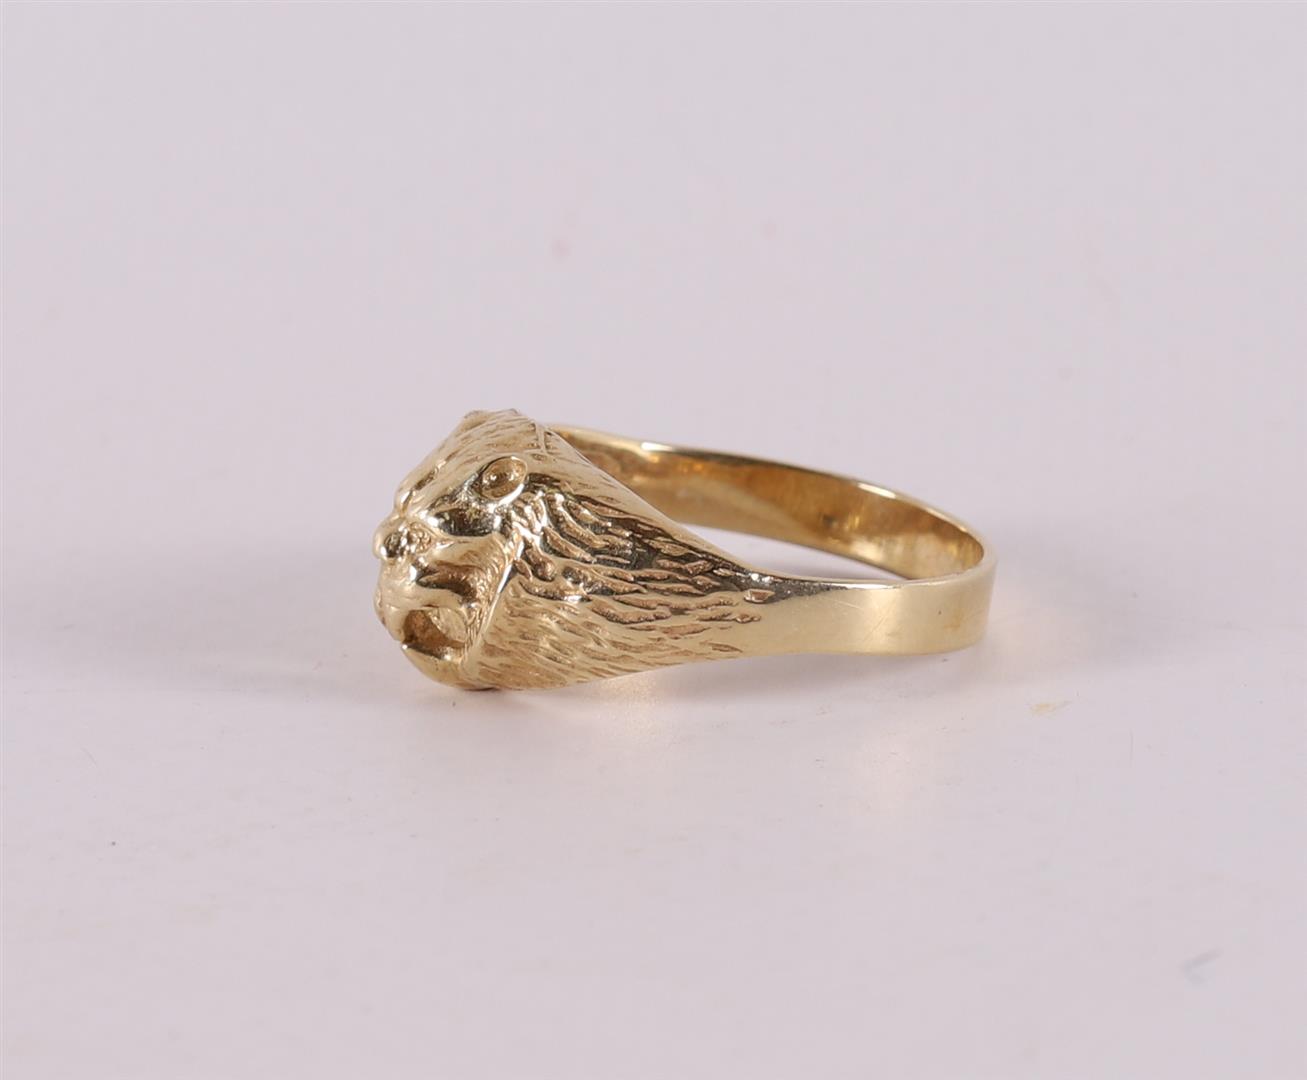 A 14 kt 585/1000 lion's head ring, 4.7 grams, ring size 24, Ø 20.5 mm. - Image 2 of 2